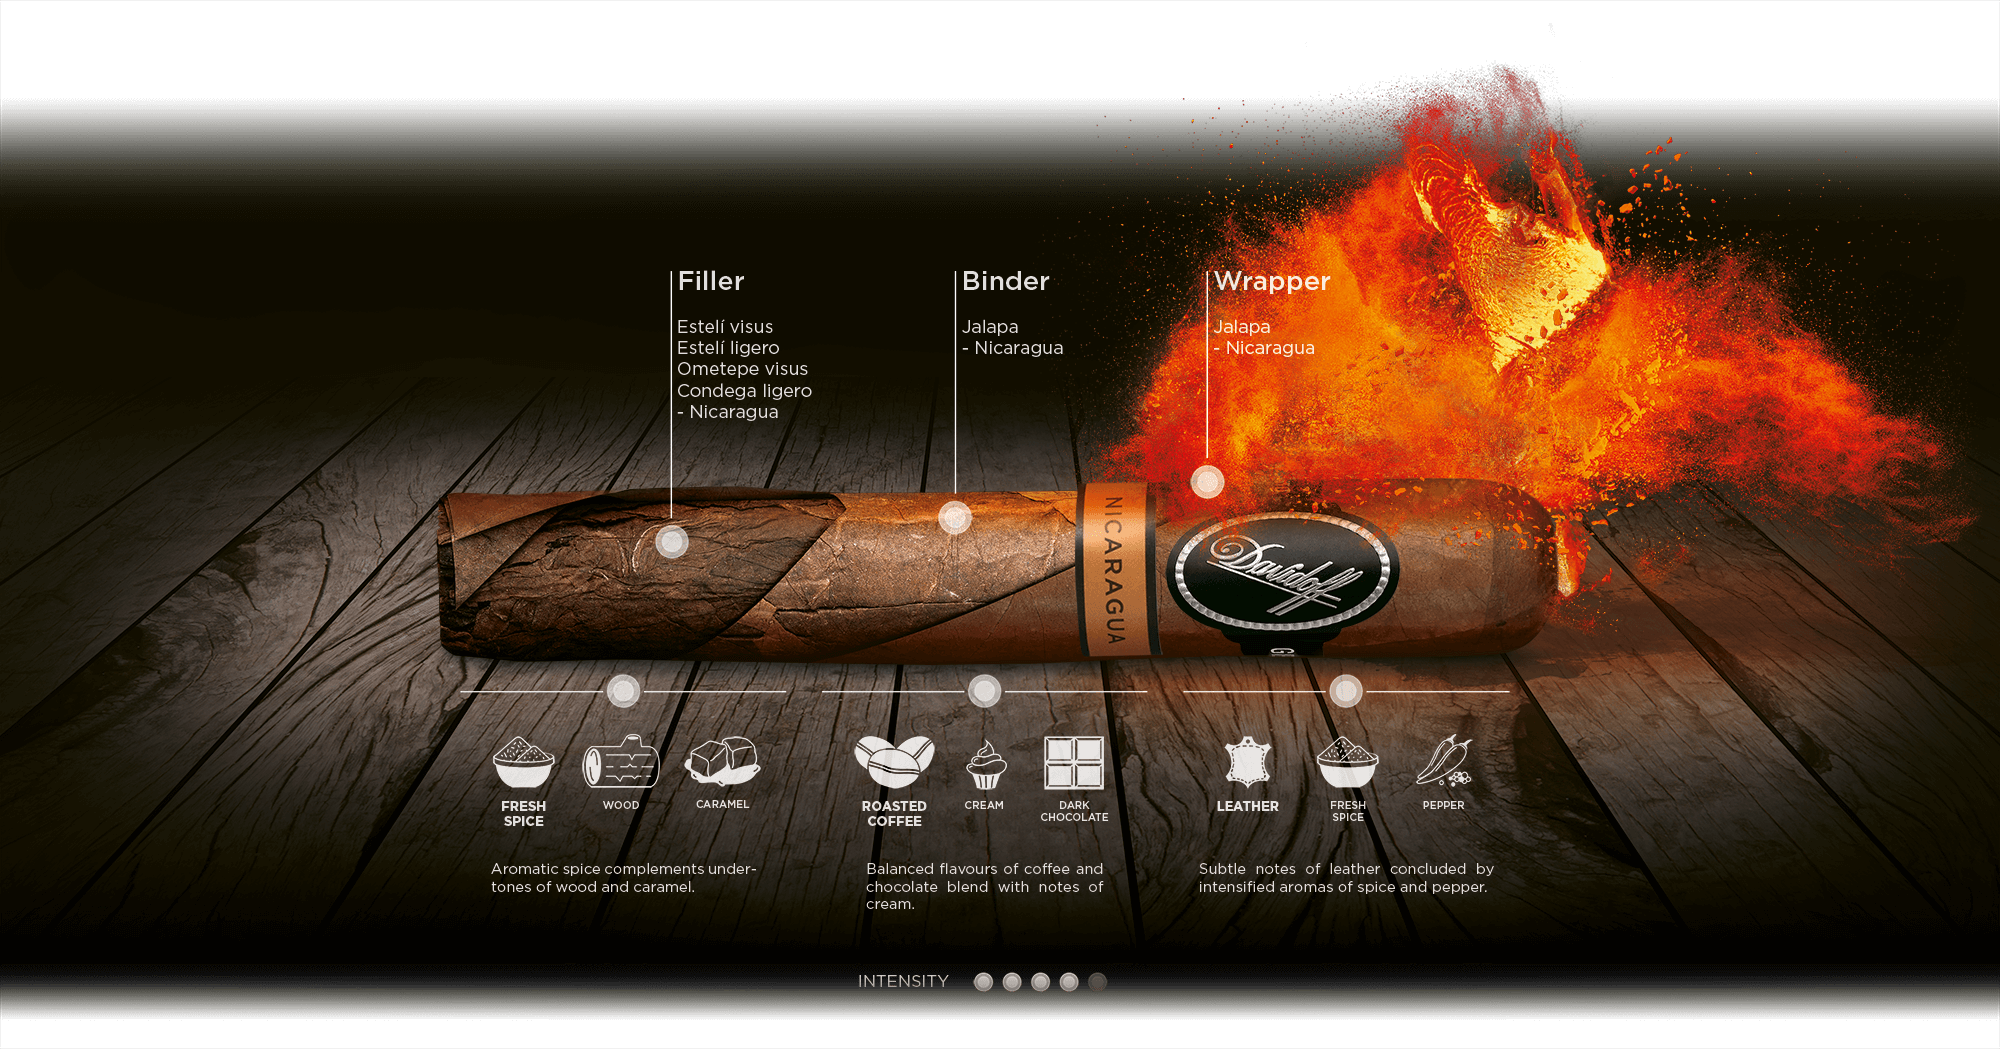 Blend banner of the Davidoff Nicaragua line including tobacco information, aromas and intensity. 